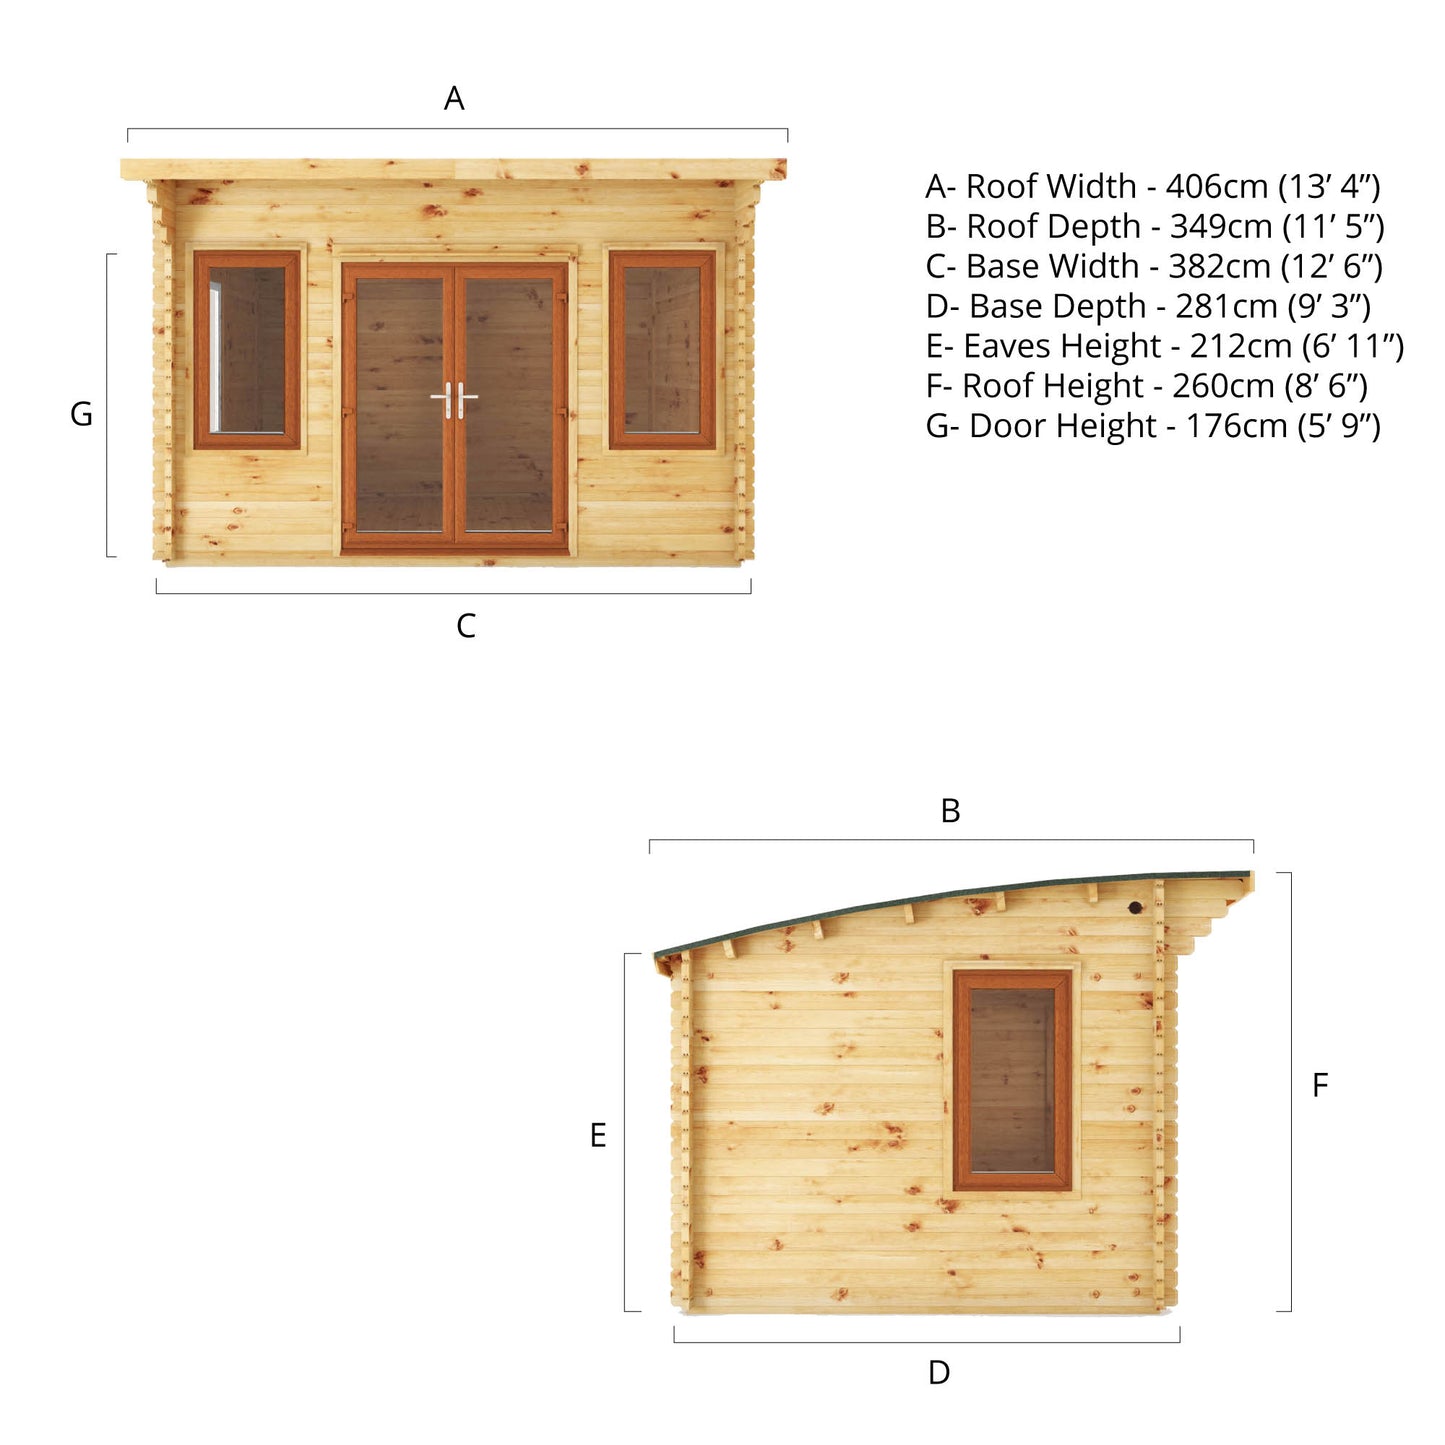 The 4m x 3m Tawny Curved Roof Log Cabin with Oak UPVC